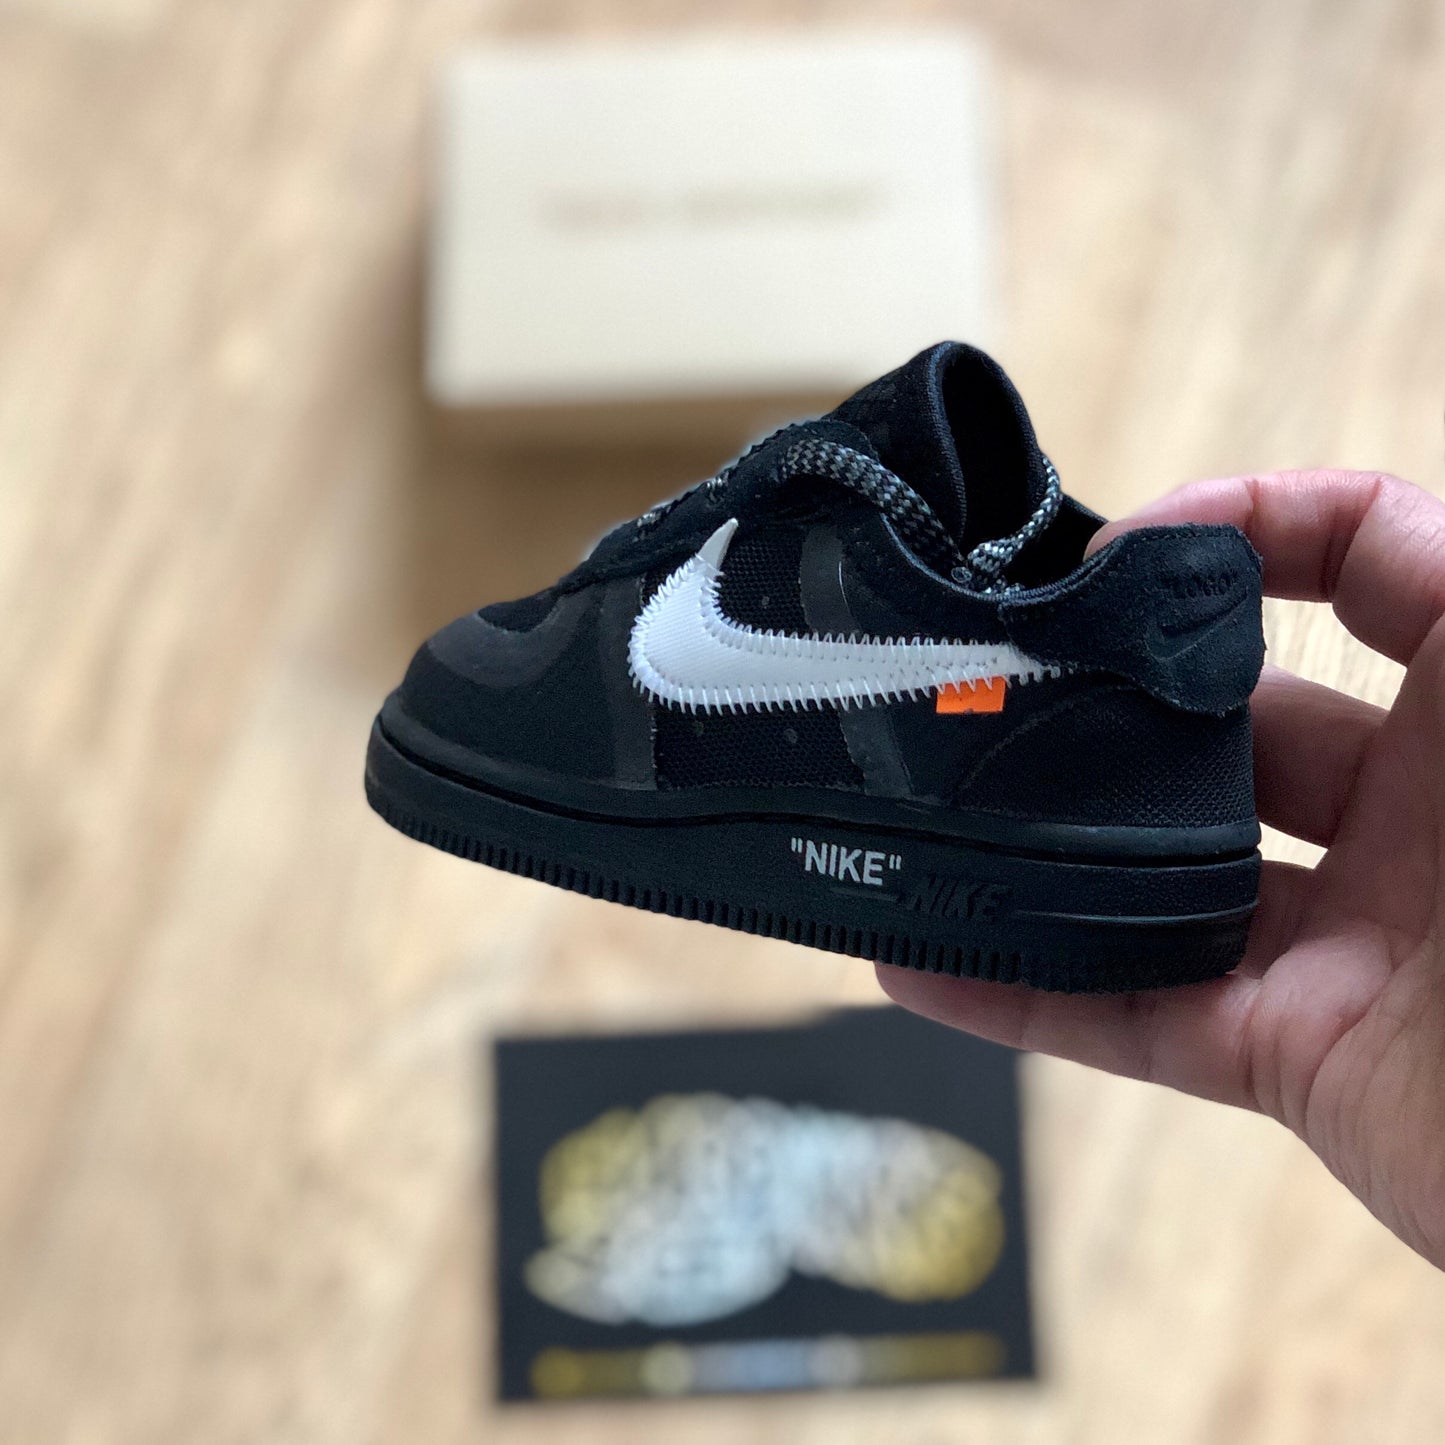 Off White Nike Air Force 1 Toddlers - Black